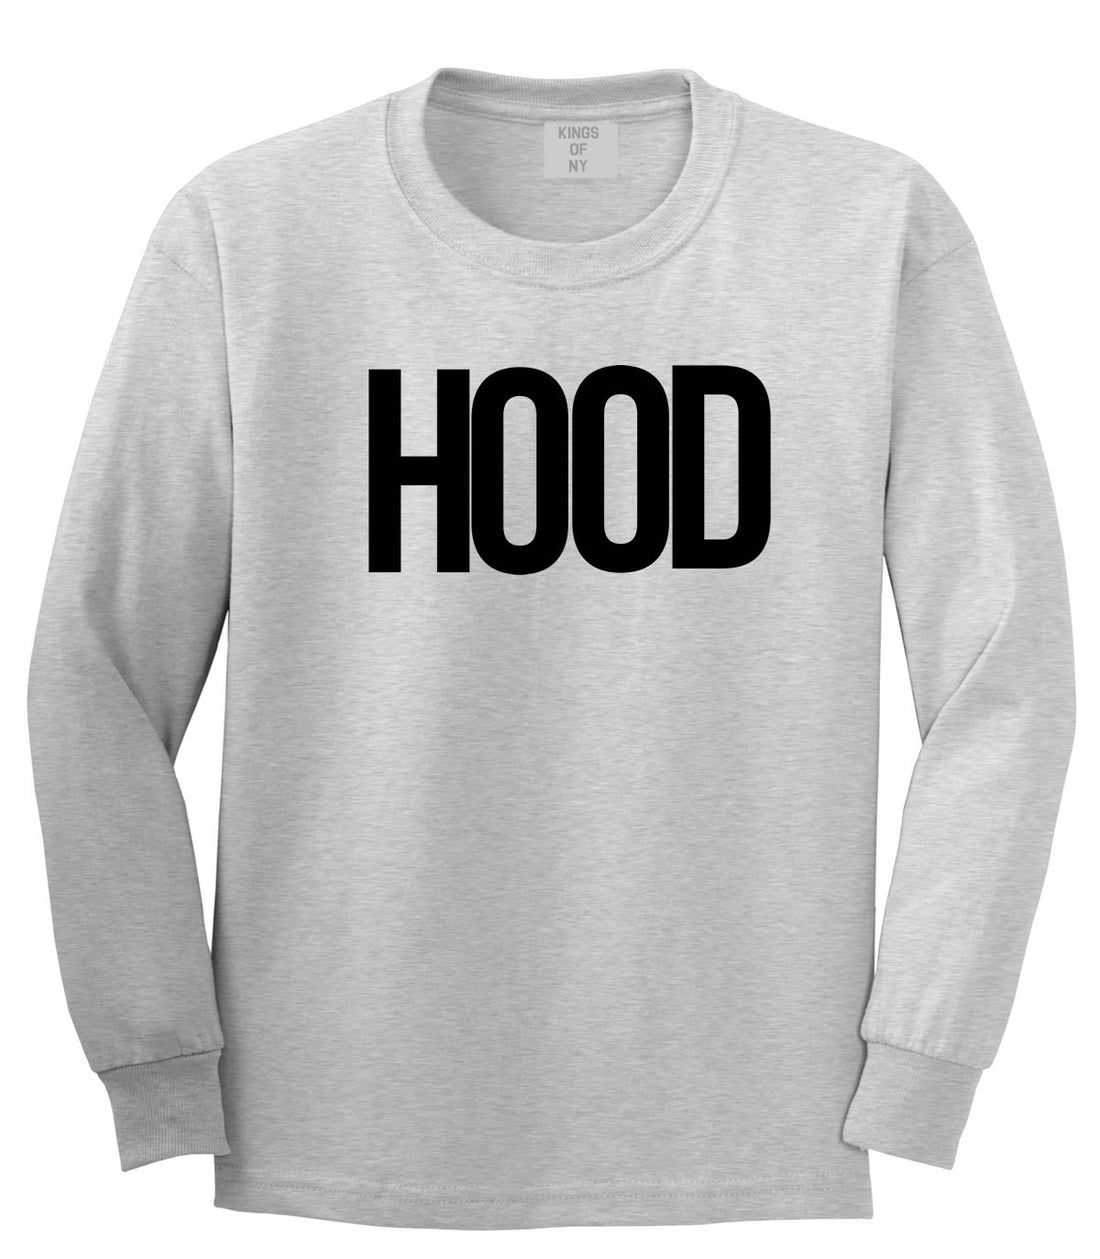 Hood Trap Style Compton New York Air Long Sleeve Boys Kids T-Shirt In Grey by Kings Of NY